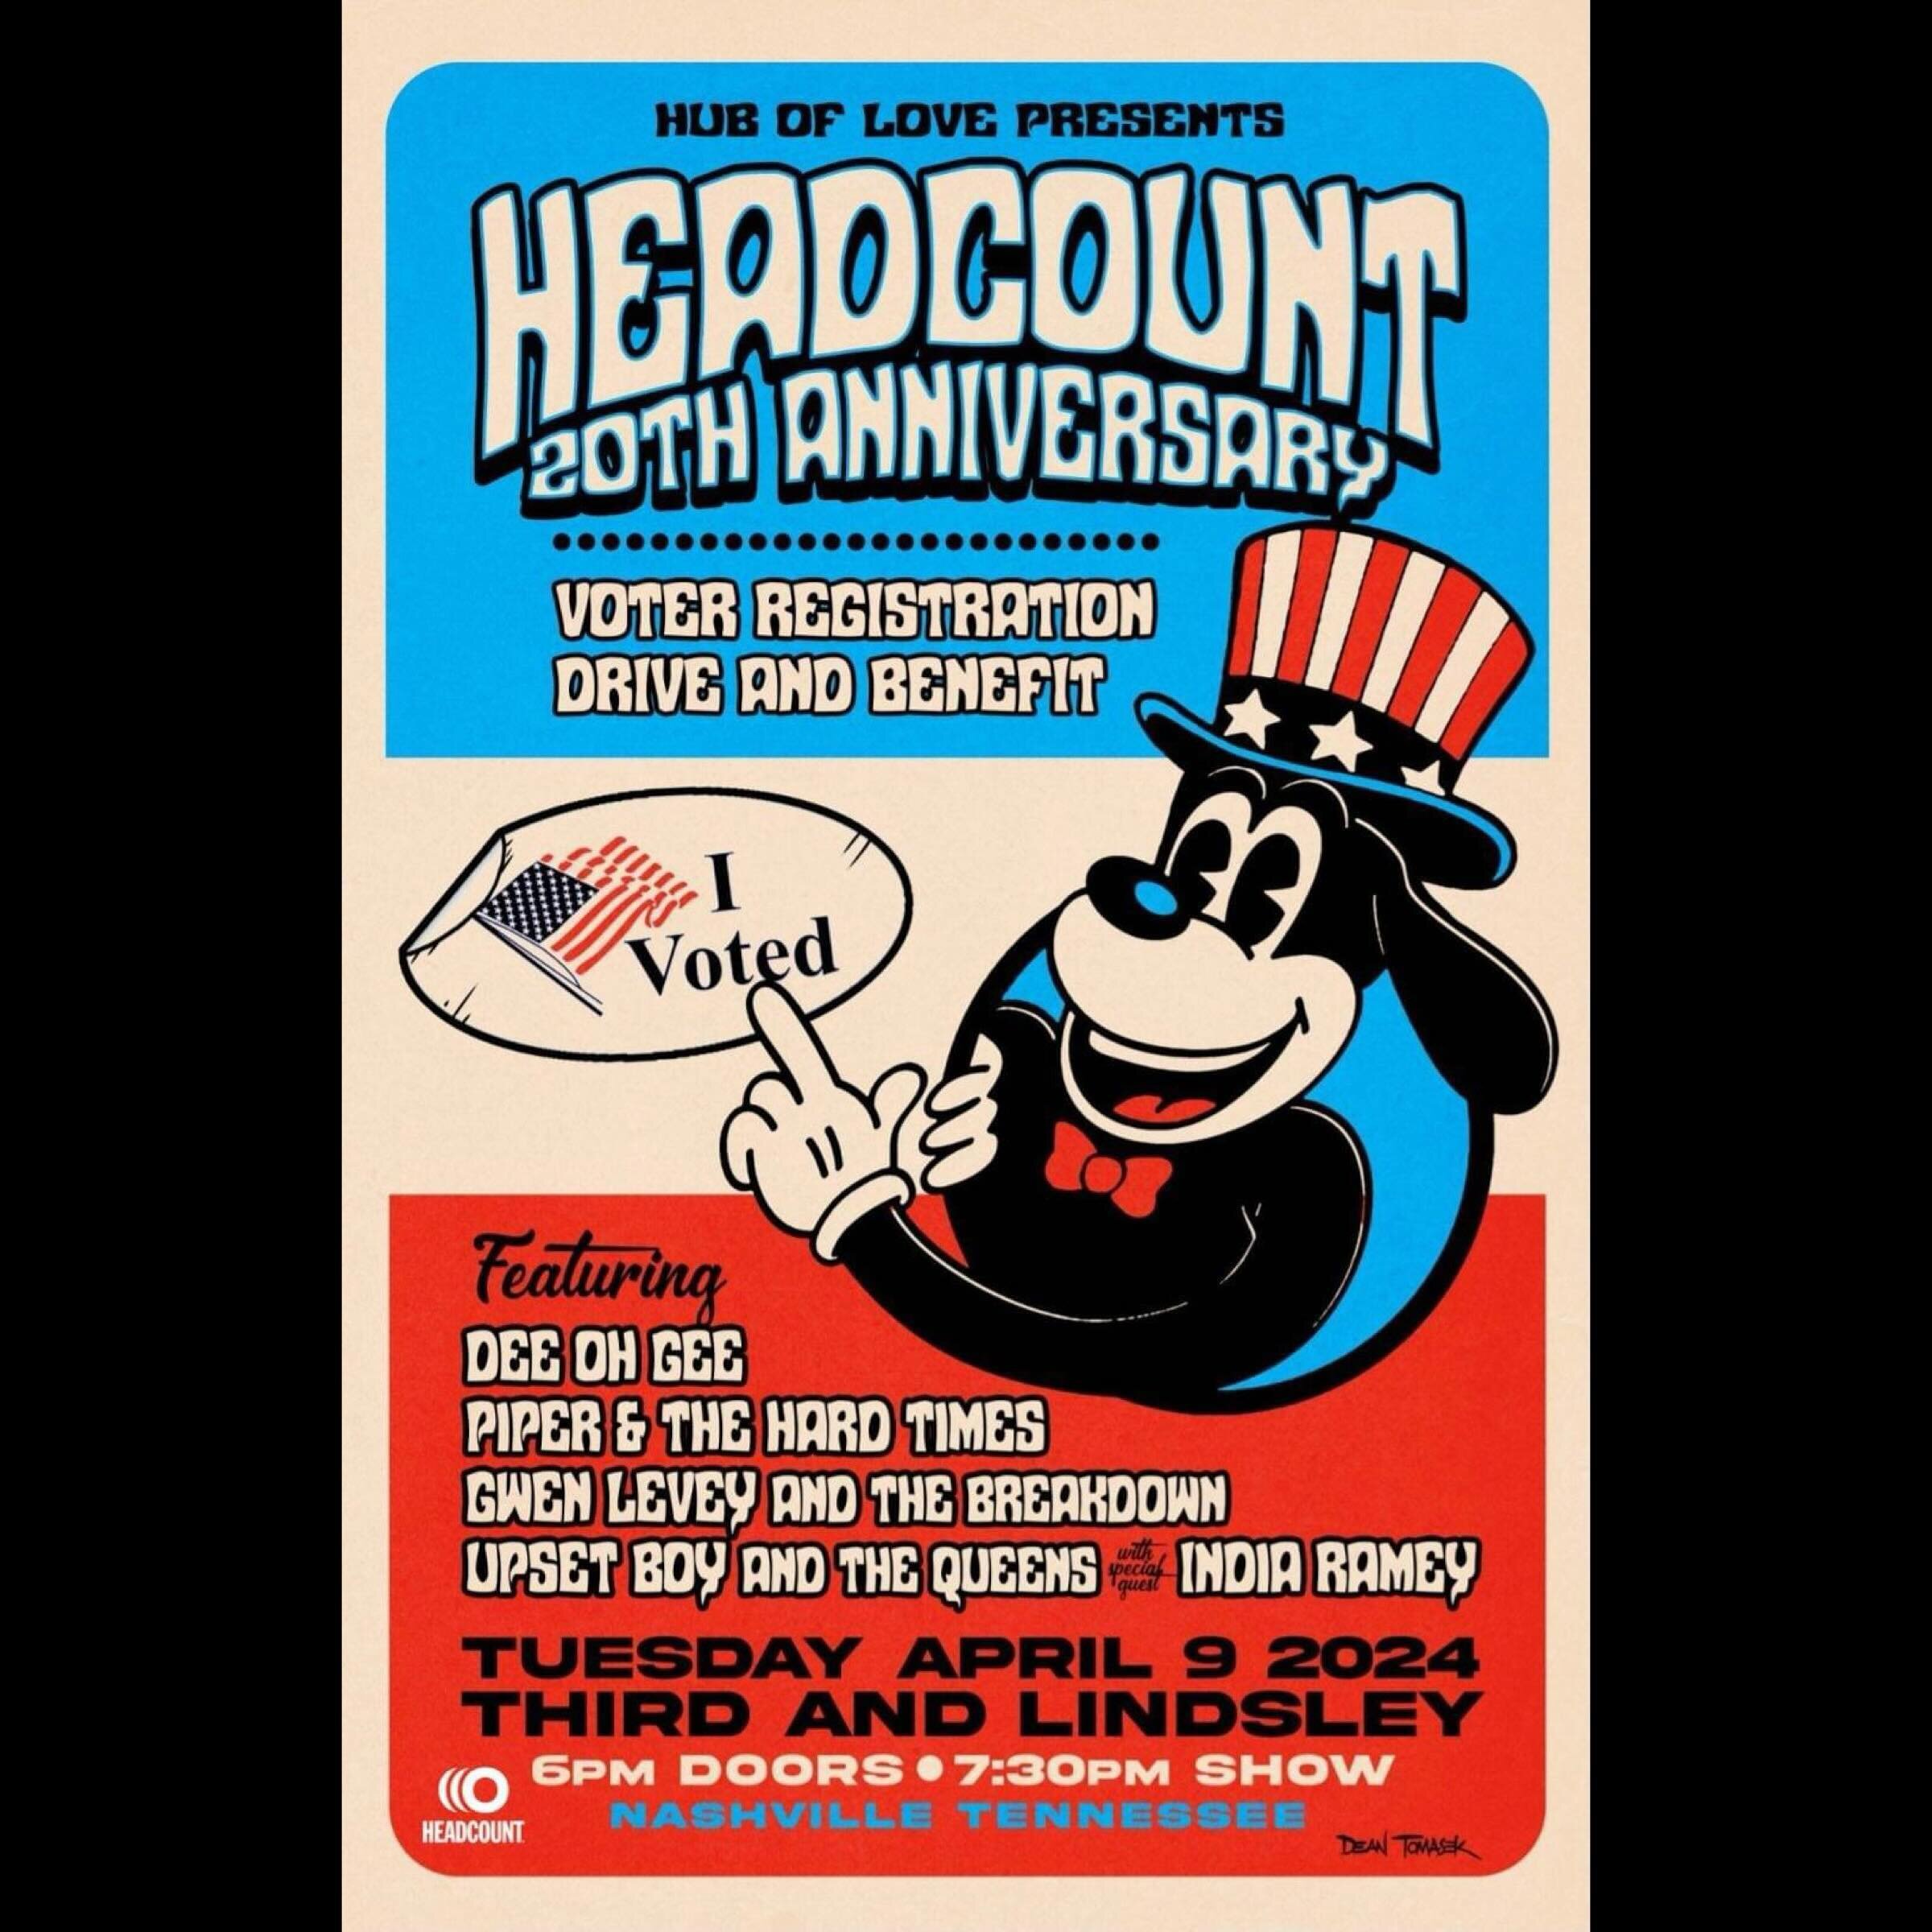 Proud to be a part of the Nashville @headcountorg effort to get more folks ready to vote! Thanks to our friend @witness_2112 for organizing a stellar lineup - make your plans and we will see you on 4/9 🙏